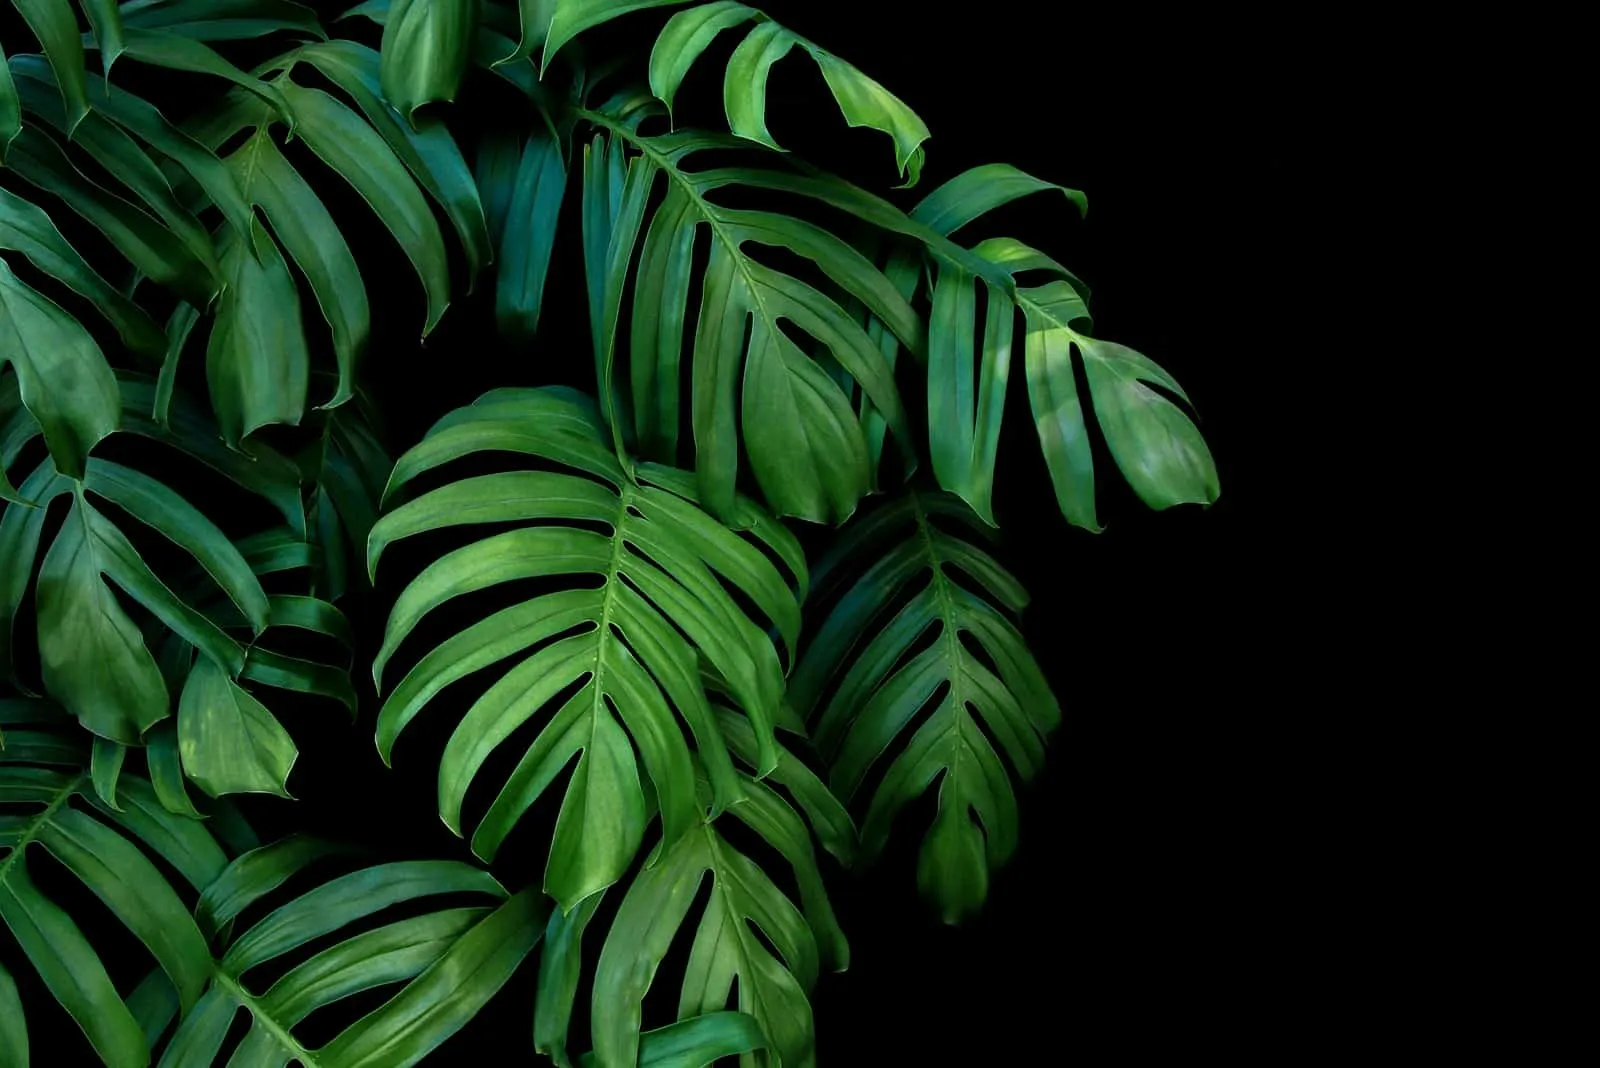 Green leaves of Monstera plant growing in wild